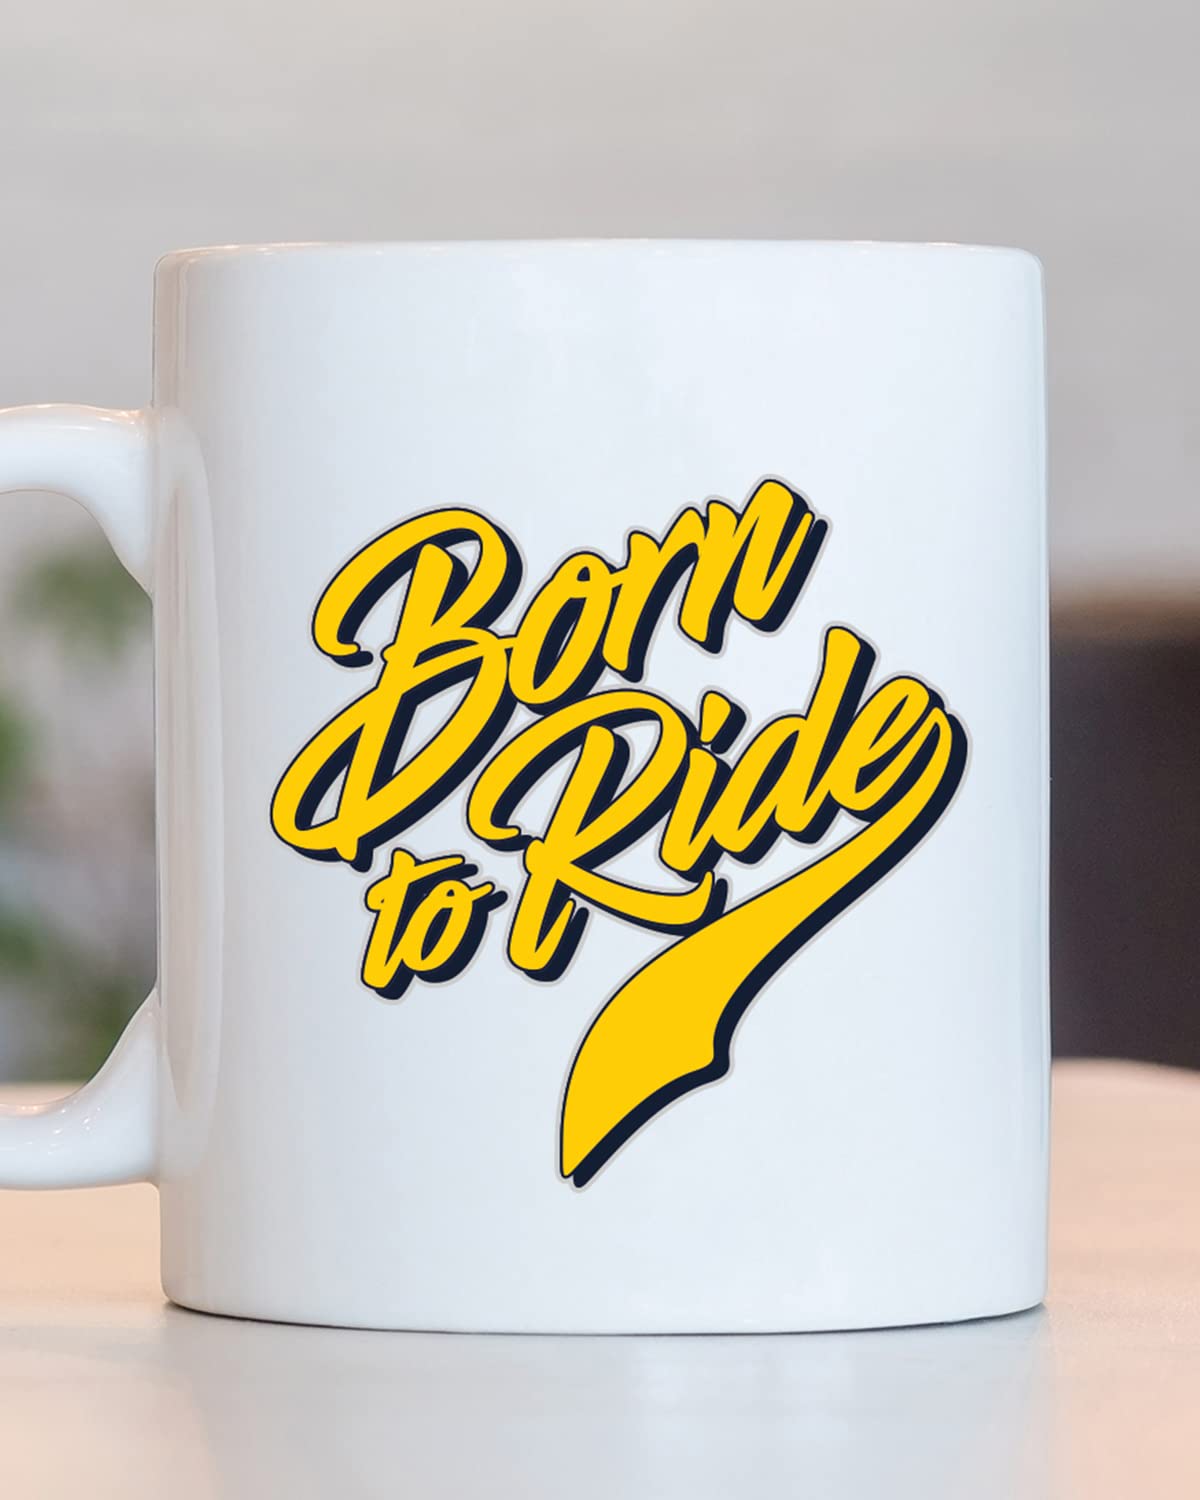 Born to Ride Coffee Mug - Unique Gifts for Bikers, Motorcycle Personalized Mugs, Gifts for Motorcycle Lovers, Bike Quotes Mug for Husband Boyfriend Birthday, Valentine Mugs for Him